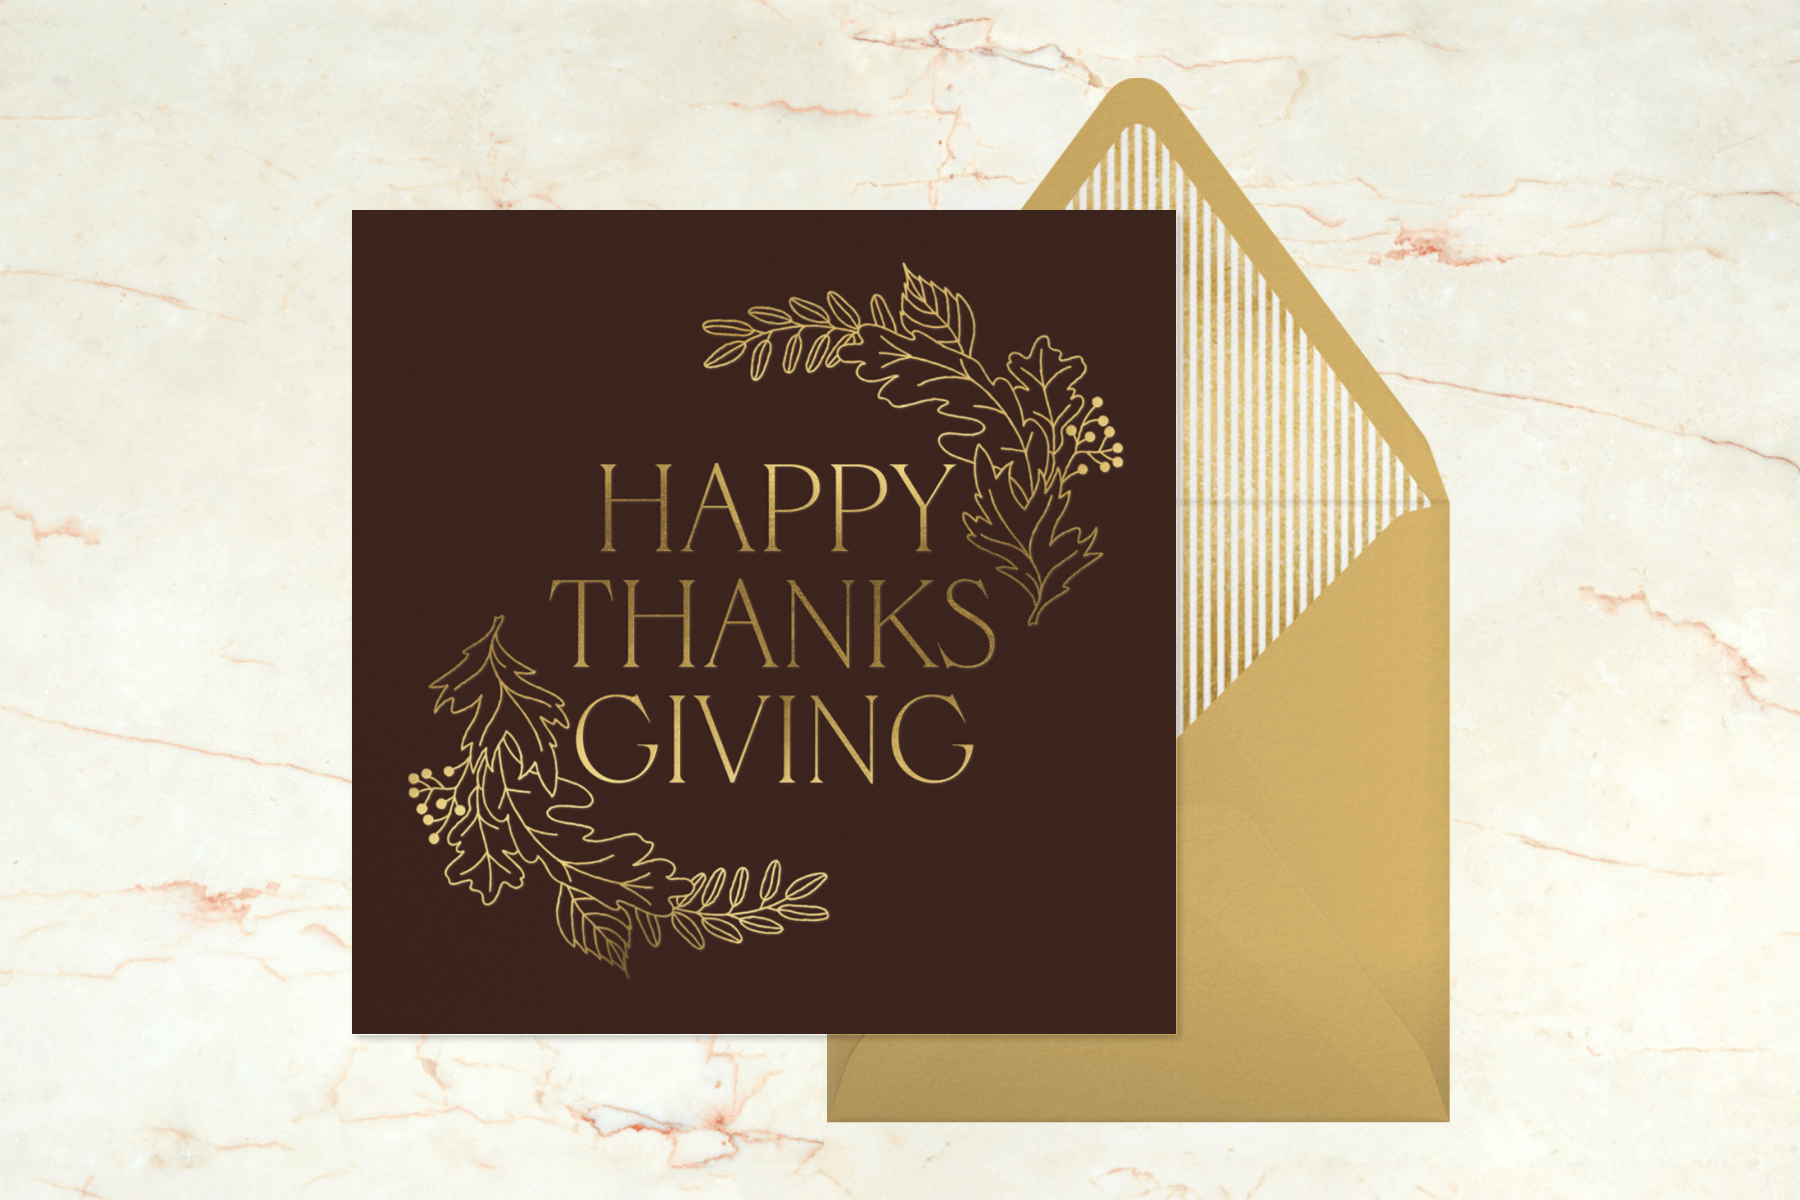 A brown and gold Thanksgiving card with the words “Happy Thanksgiving” and an oak-leaf frame.